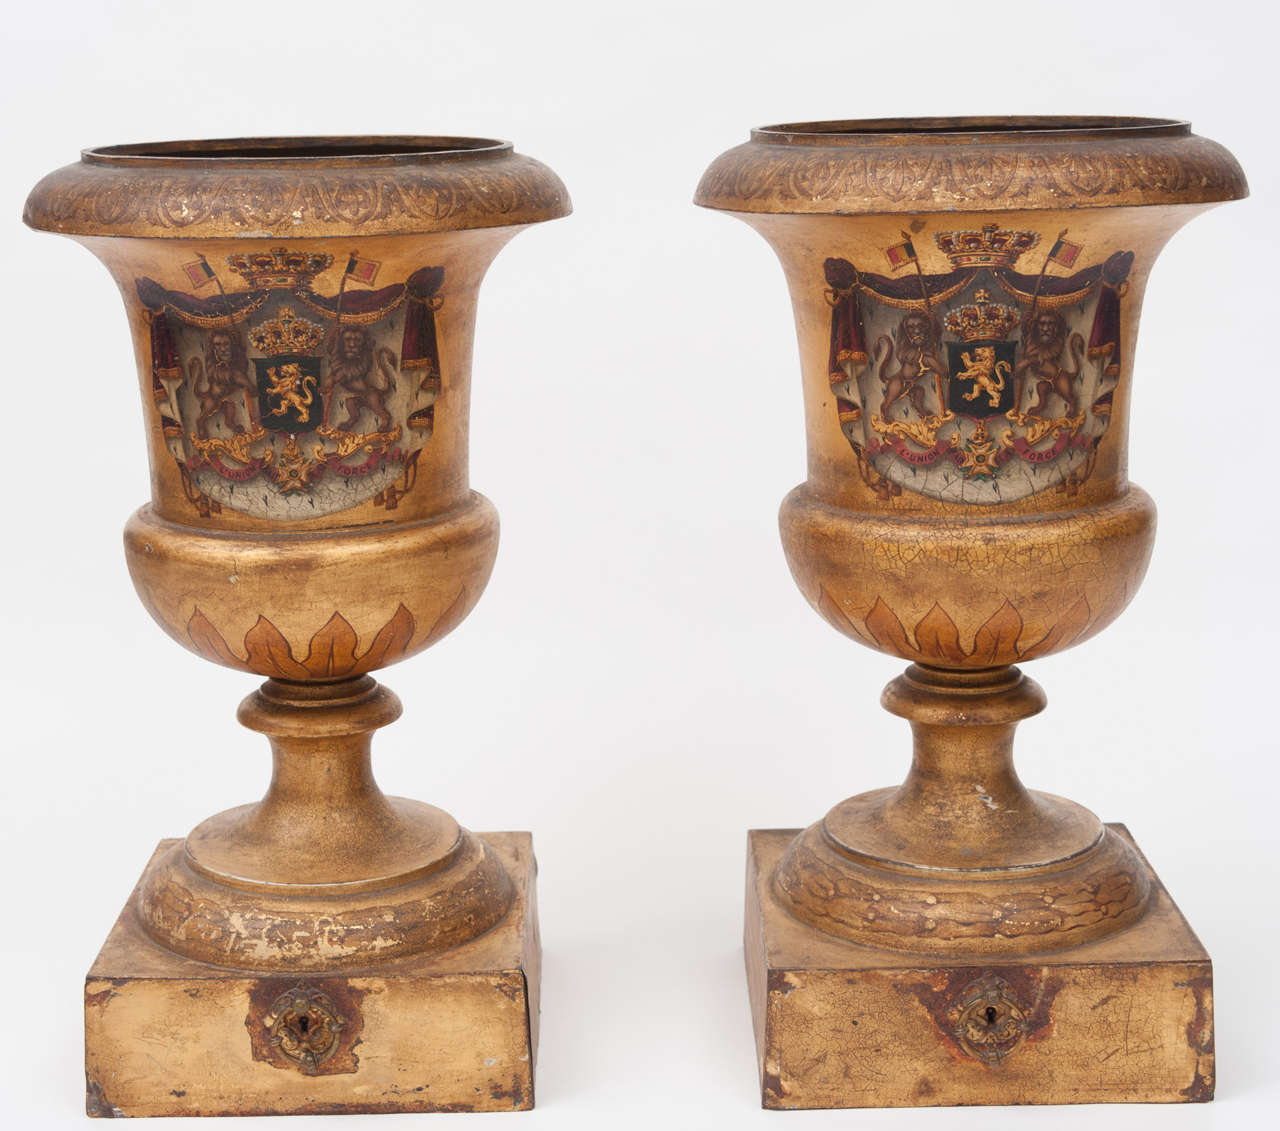 Rare pair of large tole campana shaped urns, with original decoration depicting the Coat of Arms of the Belgian Royal Family.  Very finely painted on a gold background.  The plinth bases incorporating a drawer.